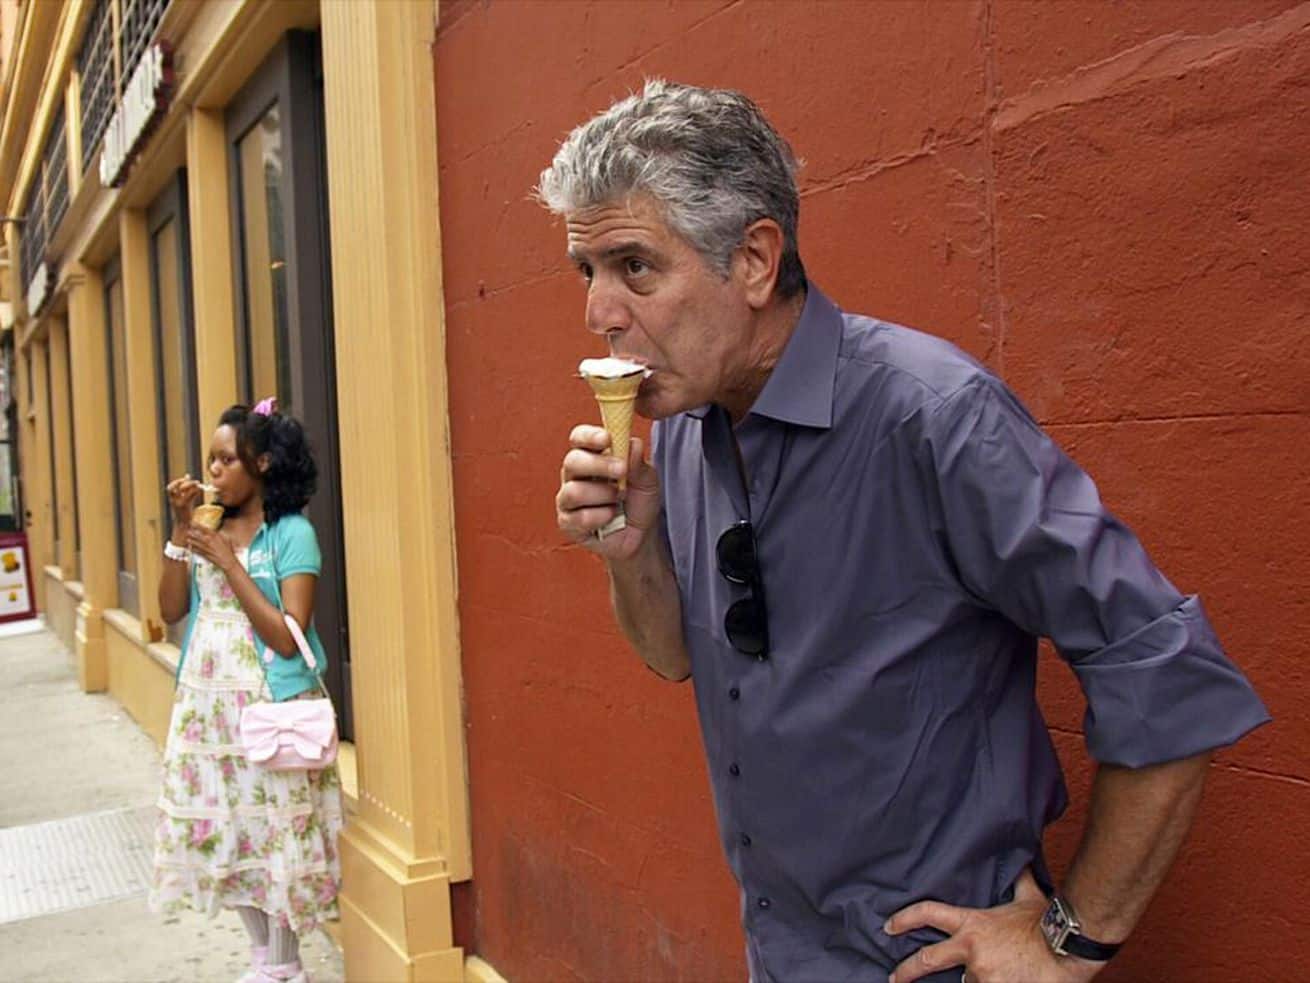 The new Anthony Bourdain doc grapples with the beloved chef’s legacy